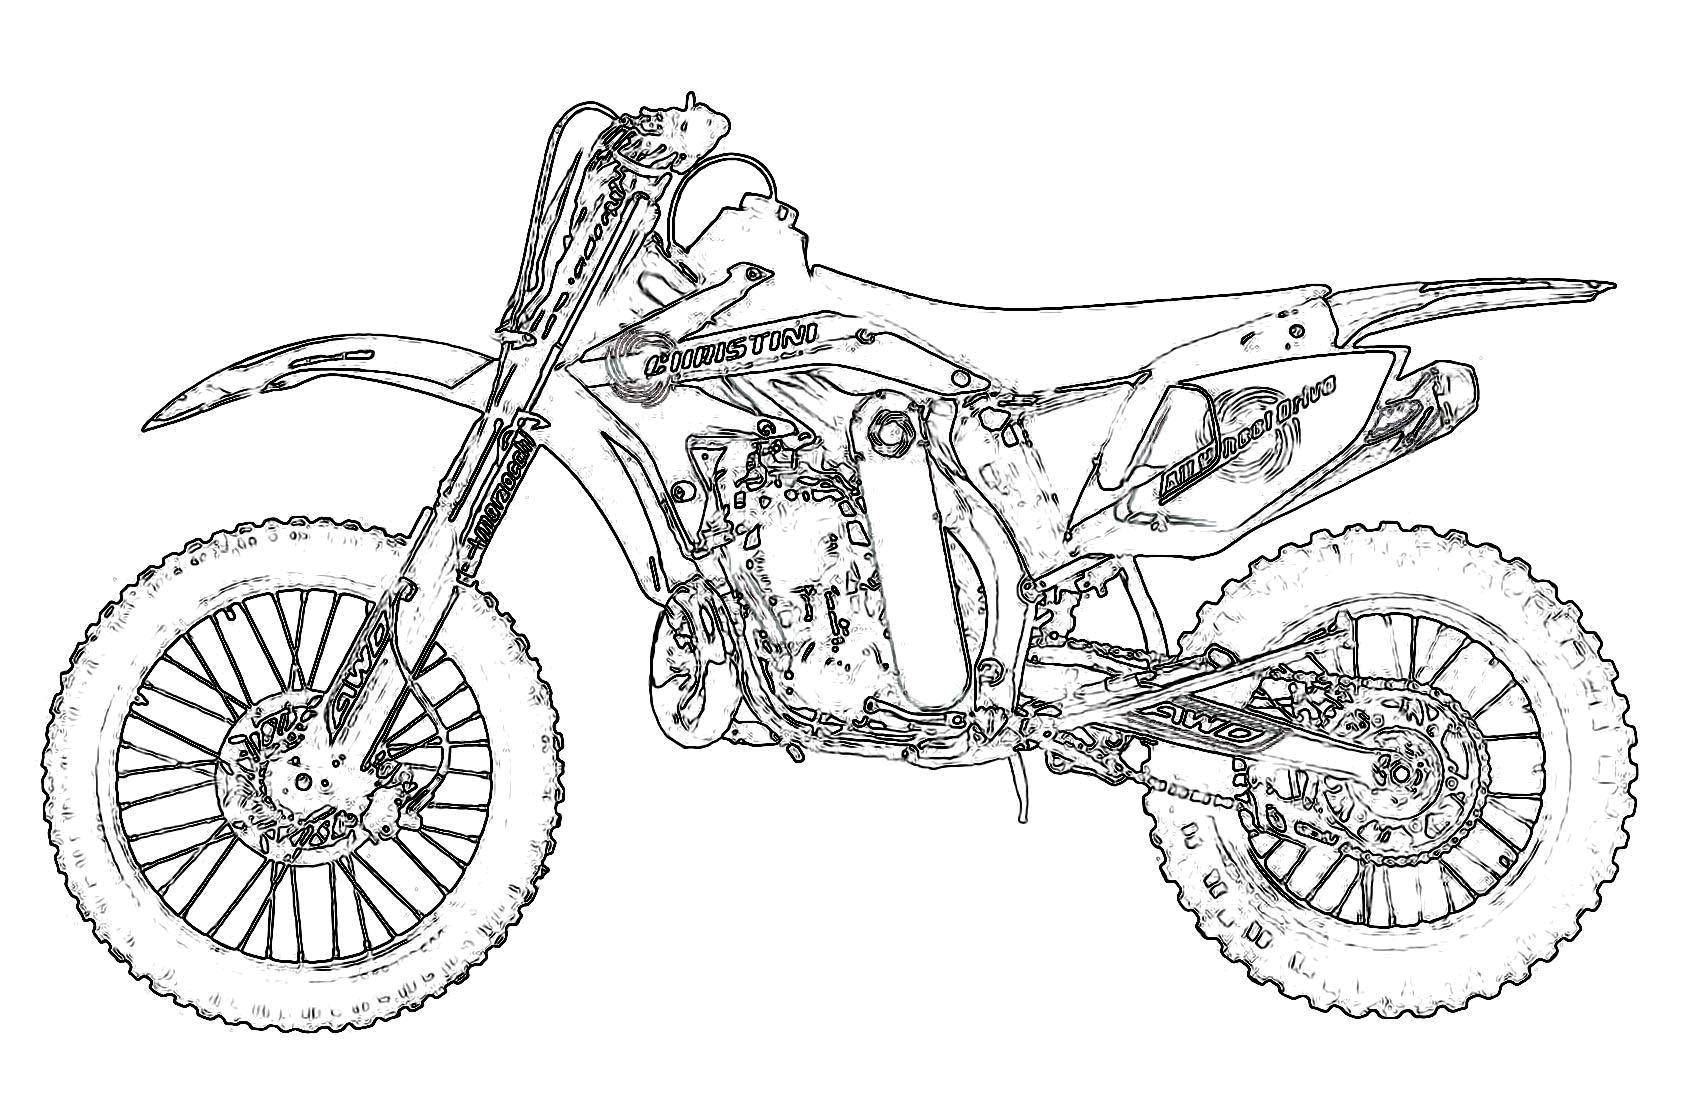 Coloring Motorcycle. Category transportation. Tags:  motorcycle, transport, speed.